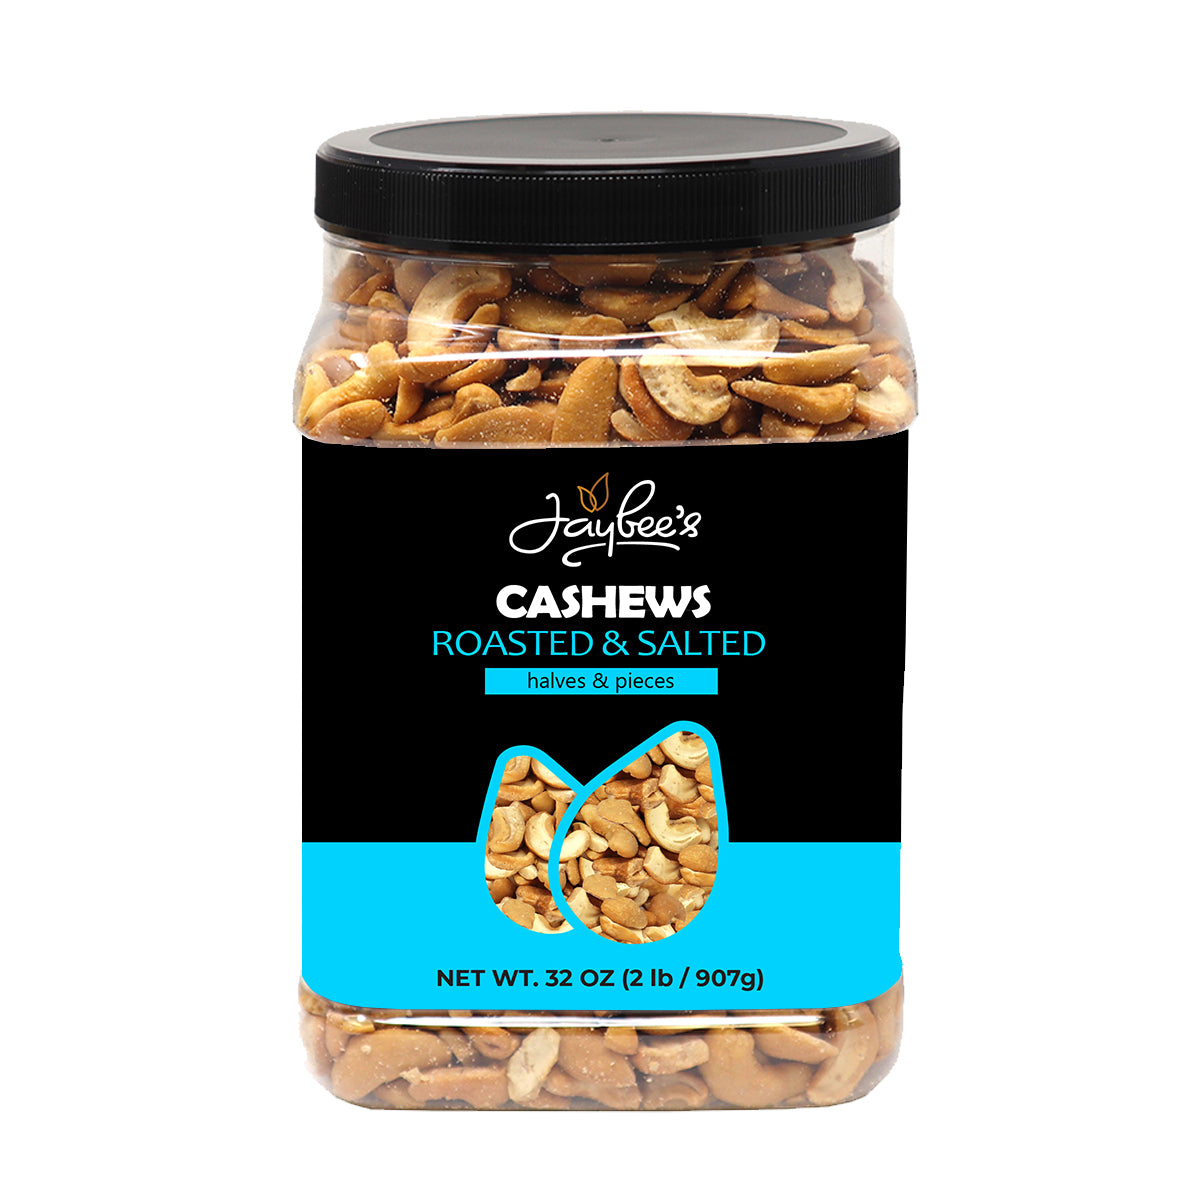 Cashews - Halves & Pieces, Roasted & Salted